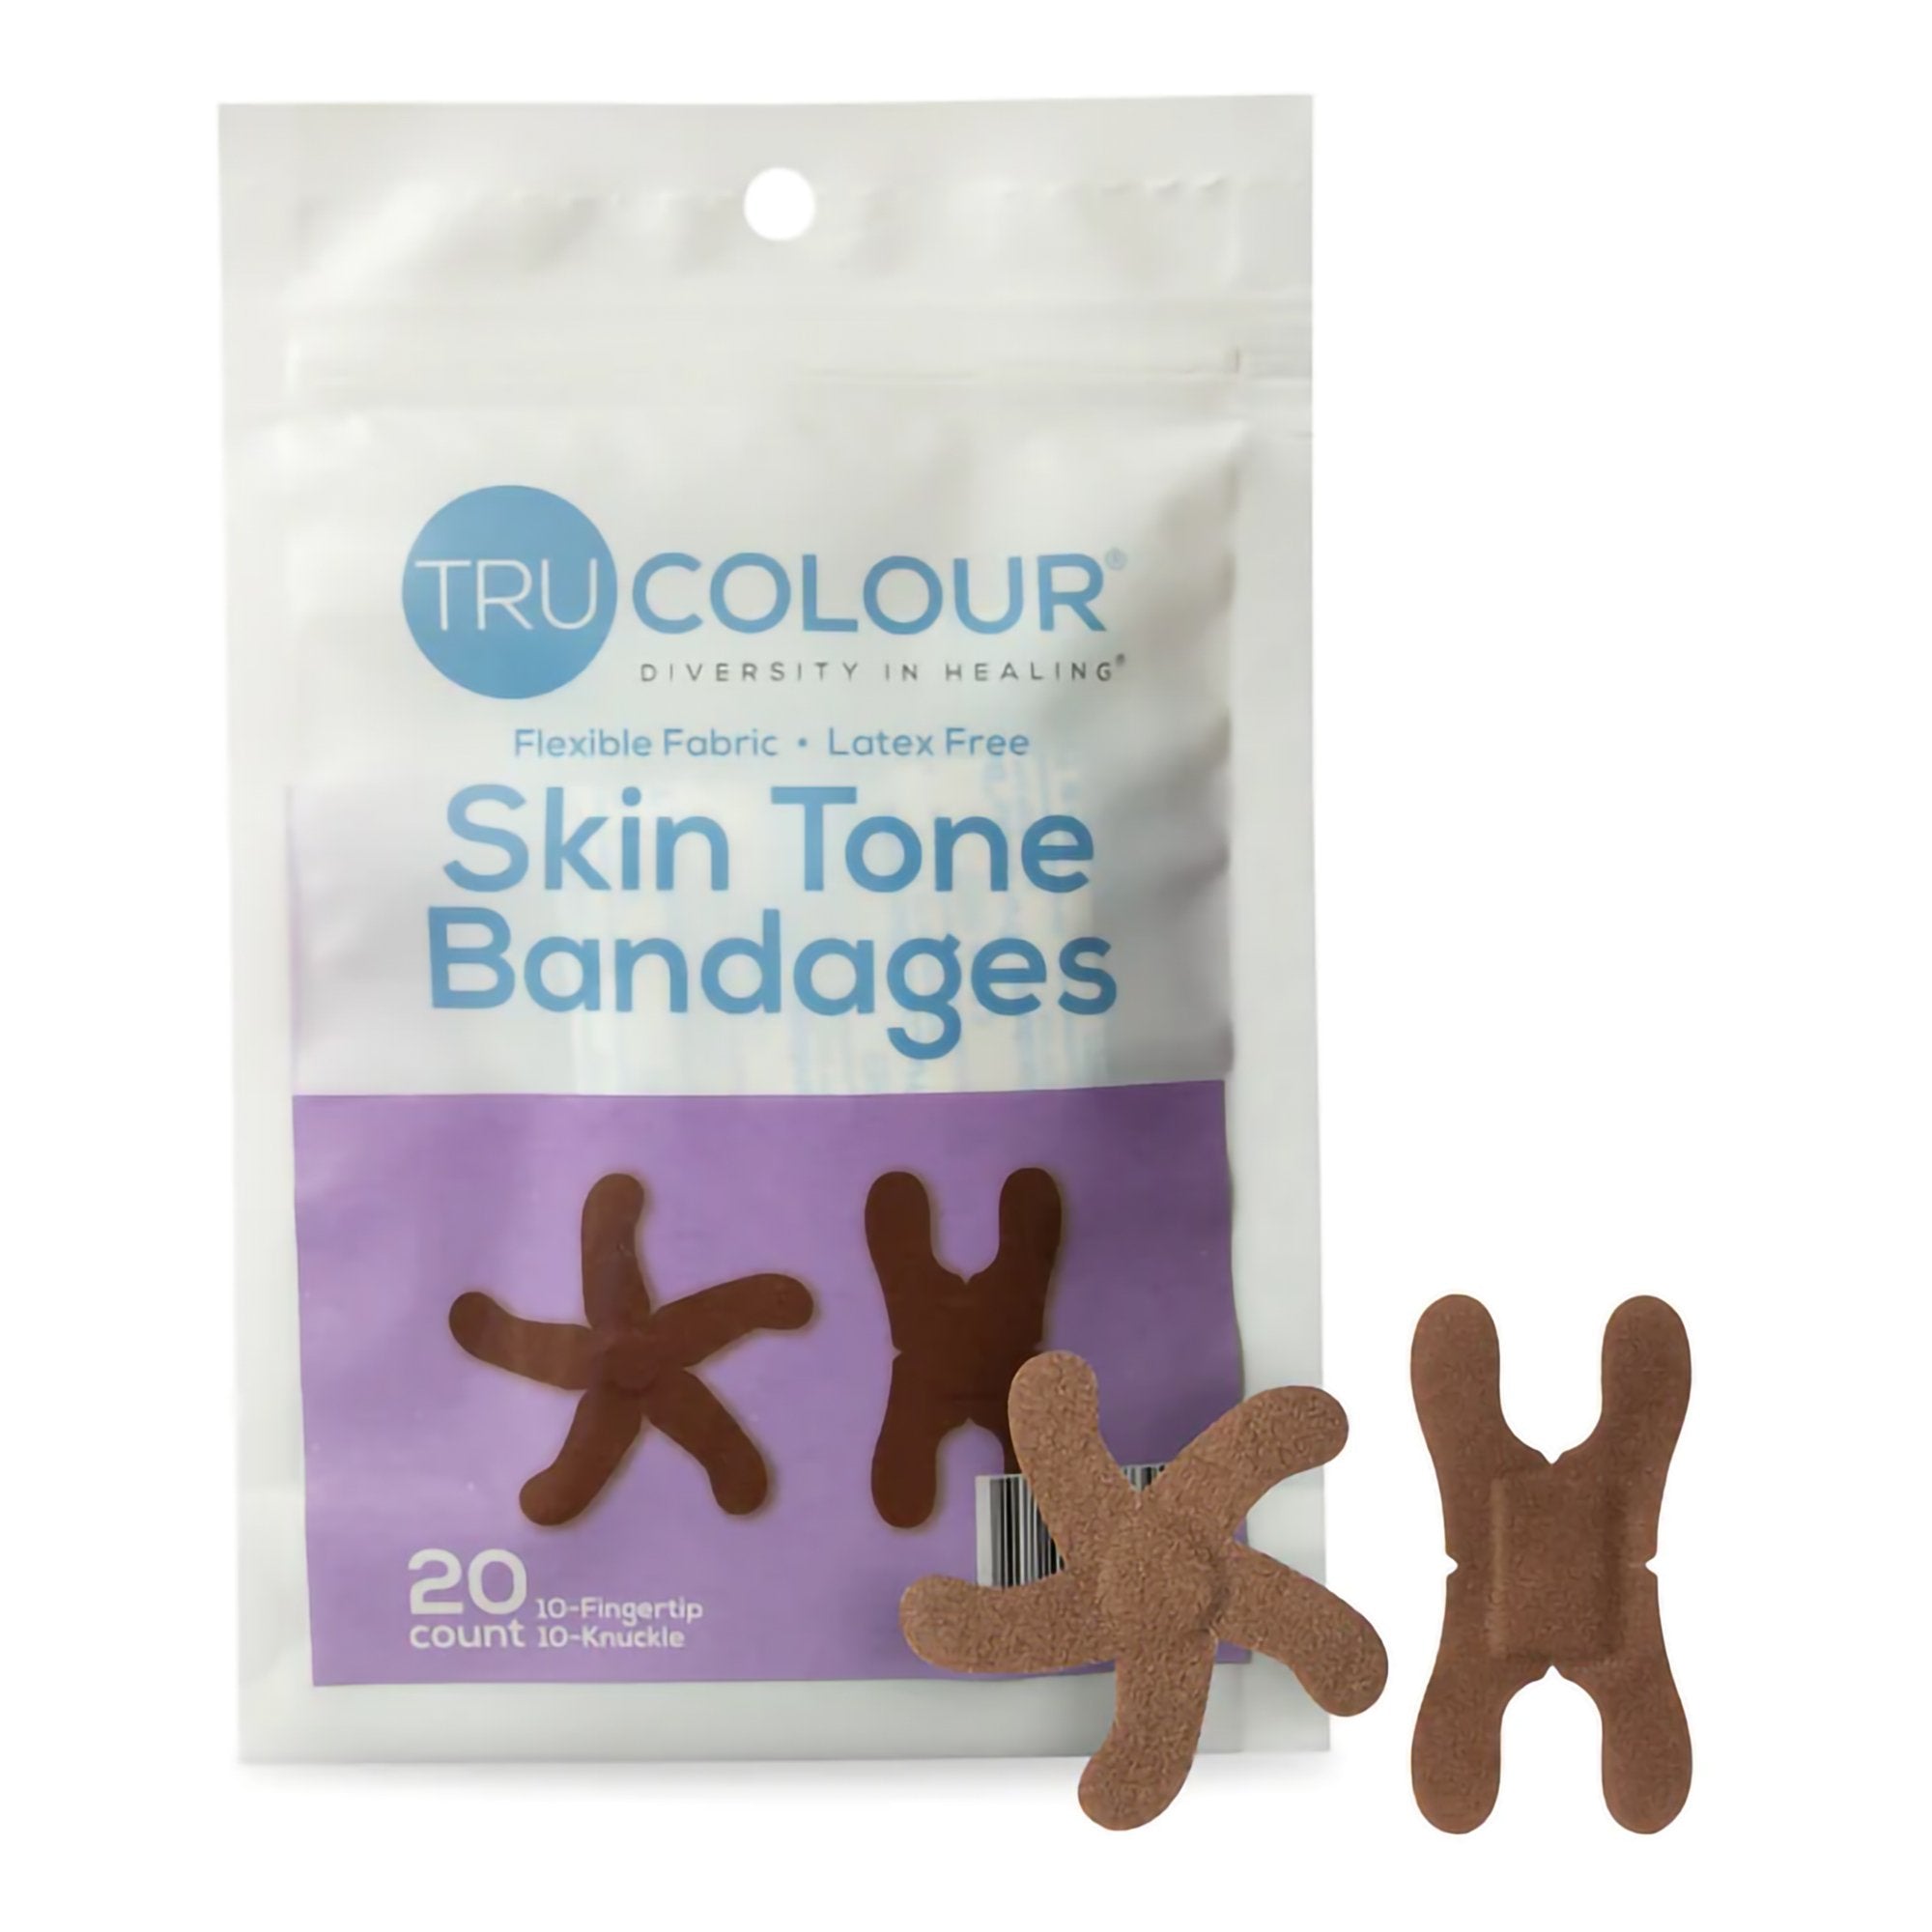 Tru-Colour Knuckle and Fingertip Bandages, Flexible Fabric for Dark Brown Skin Tones